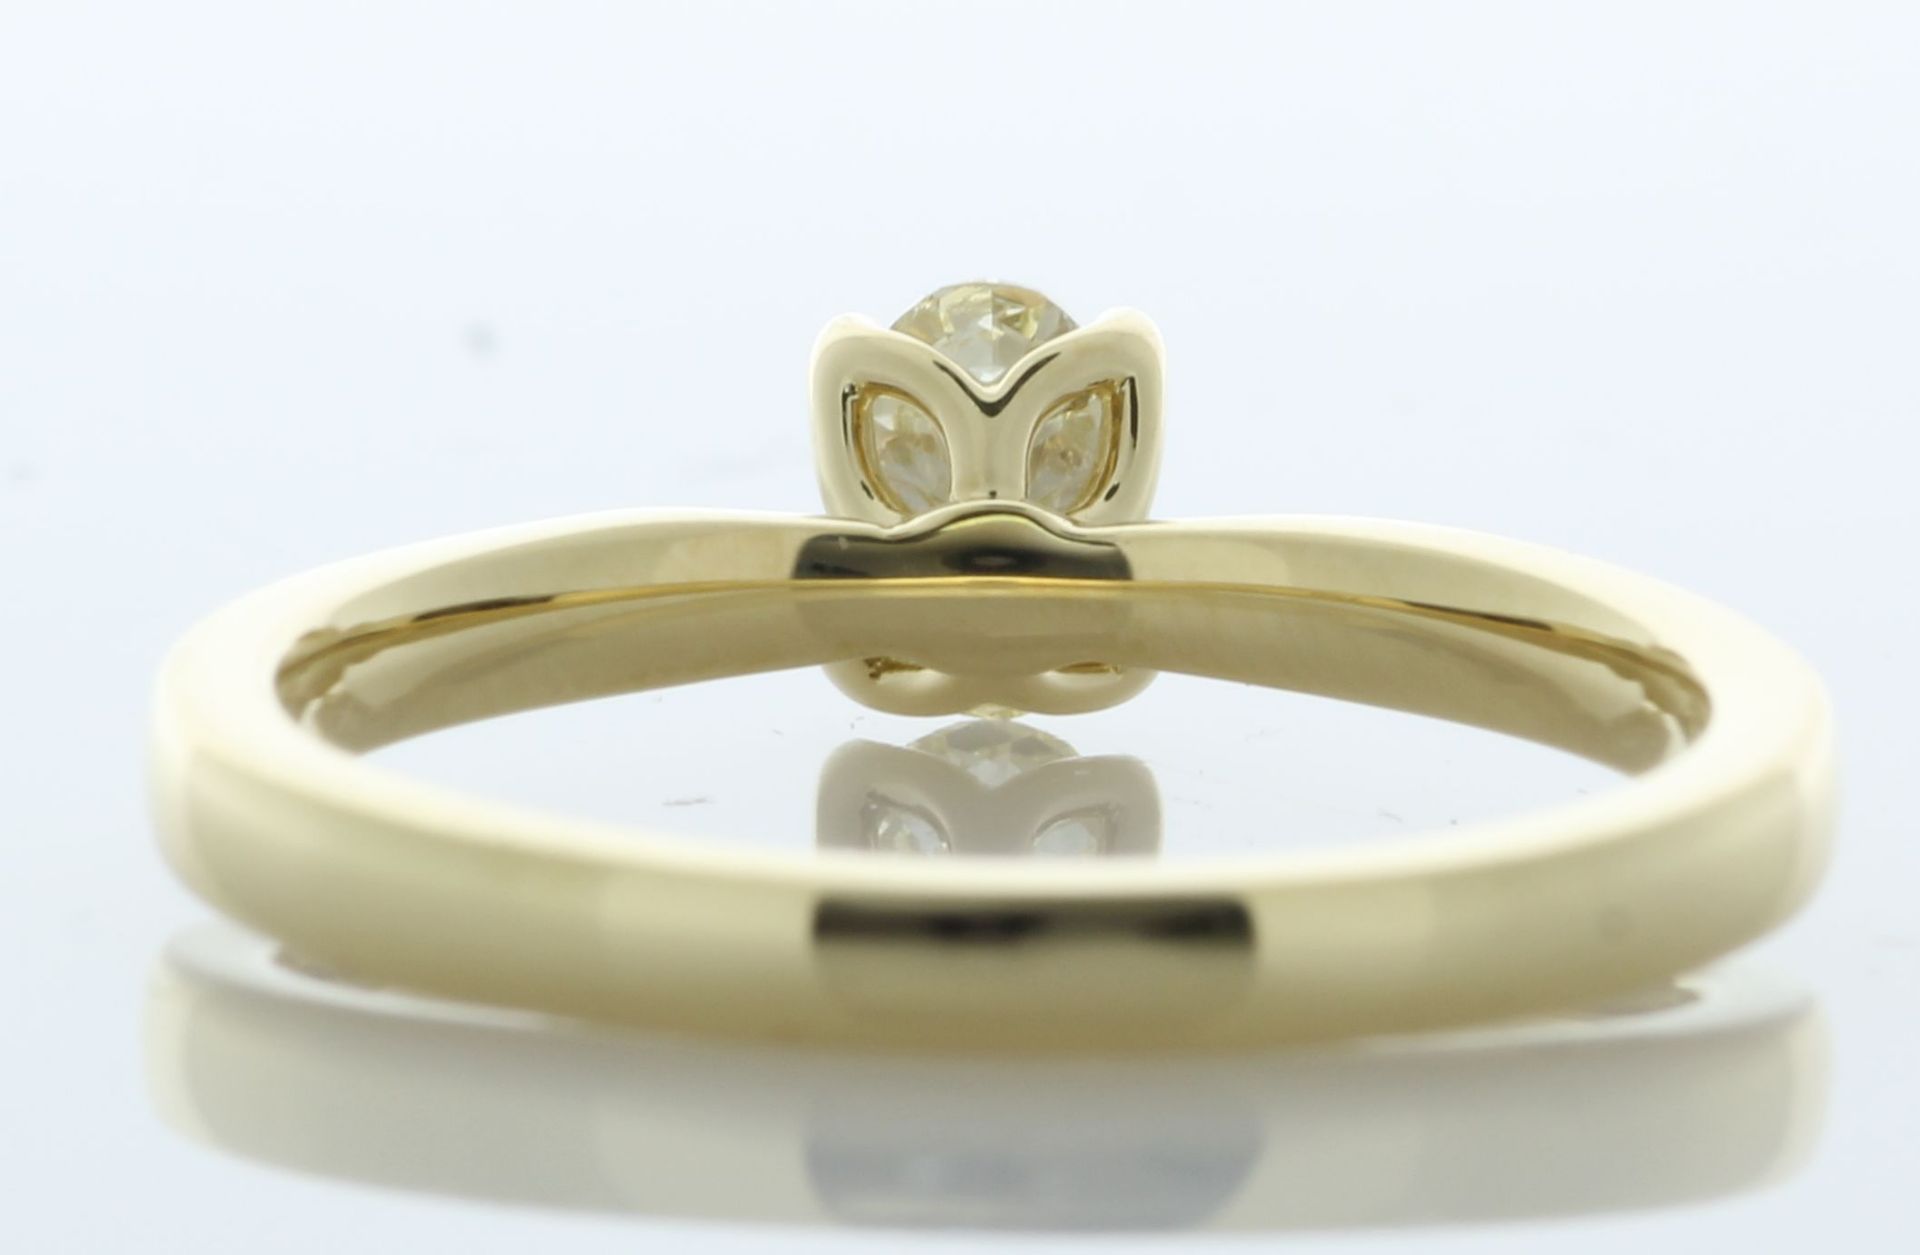 18ct Yellow Gold Single Stone Oval Cut Diamond Ring 0.42 Carats - Valued By IDI £5,685.00 - An - Image 4 of 5